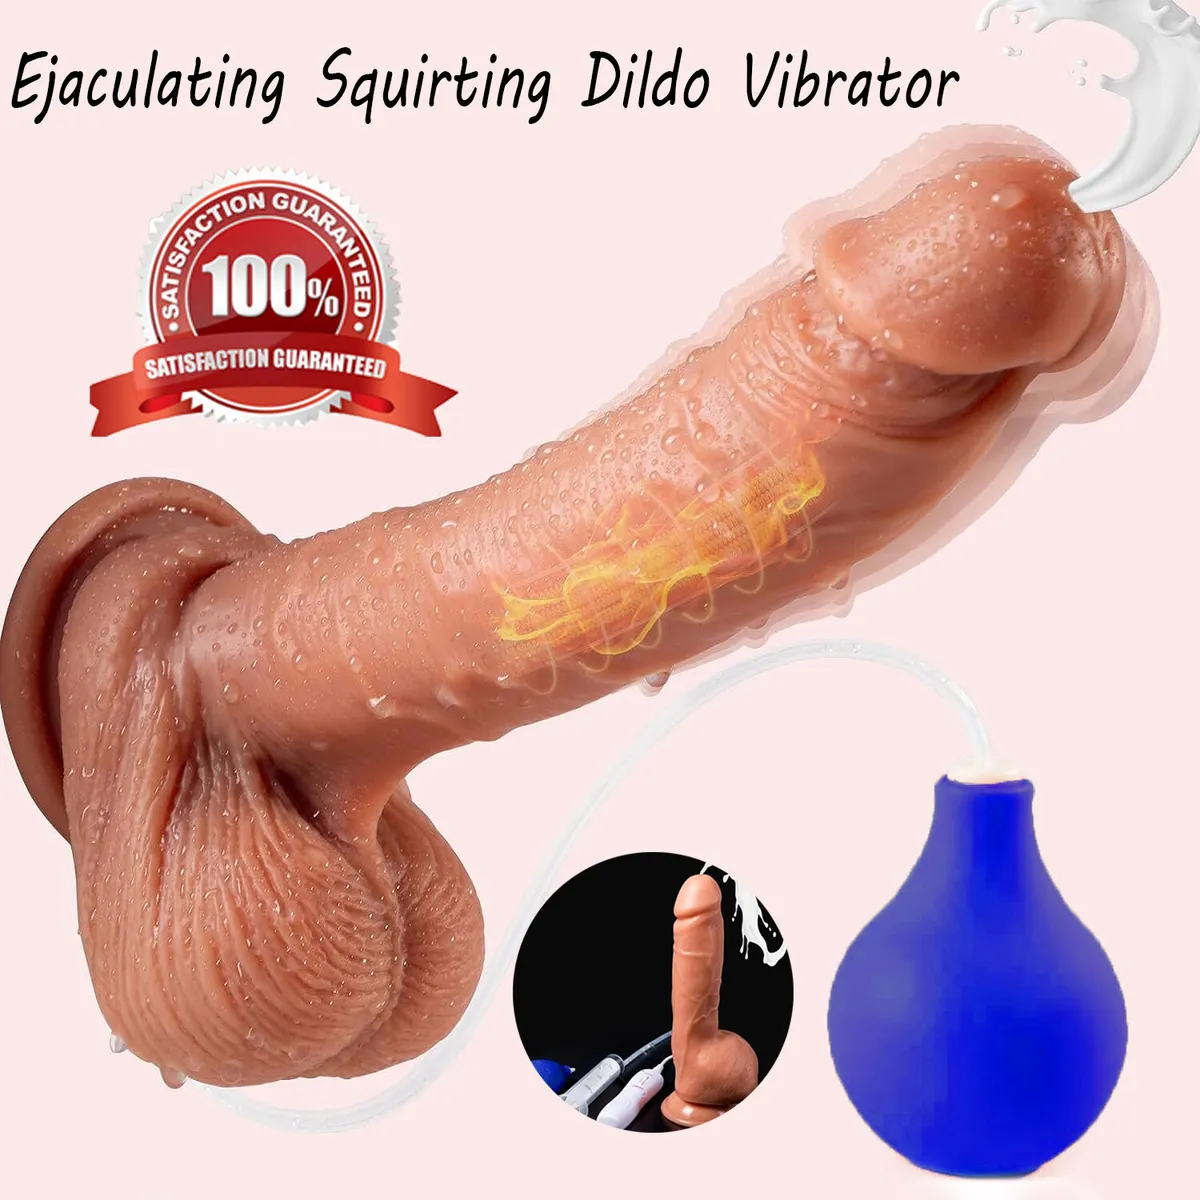 suction cup dildo squirt